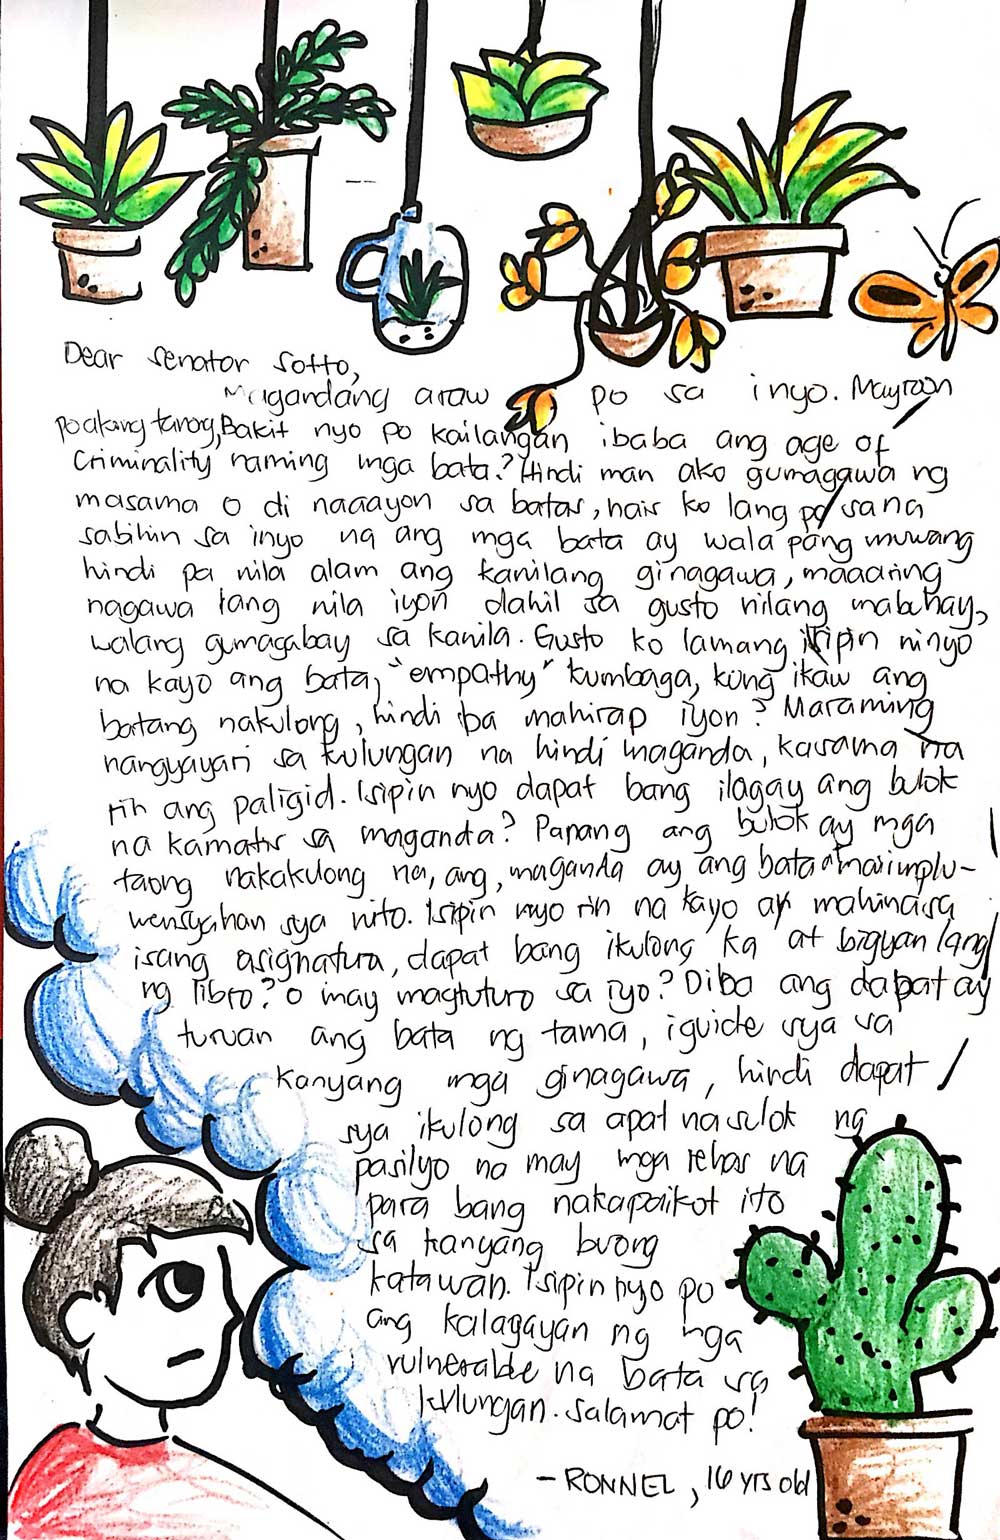 Letter to Senator Sotto from Ronnel, 16